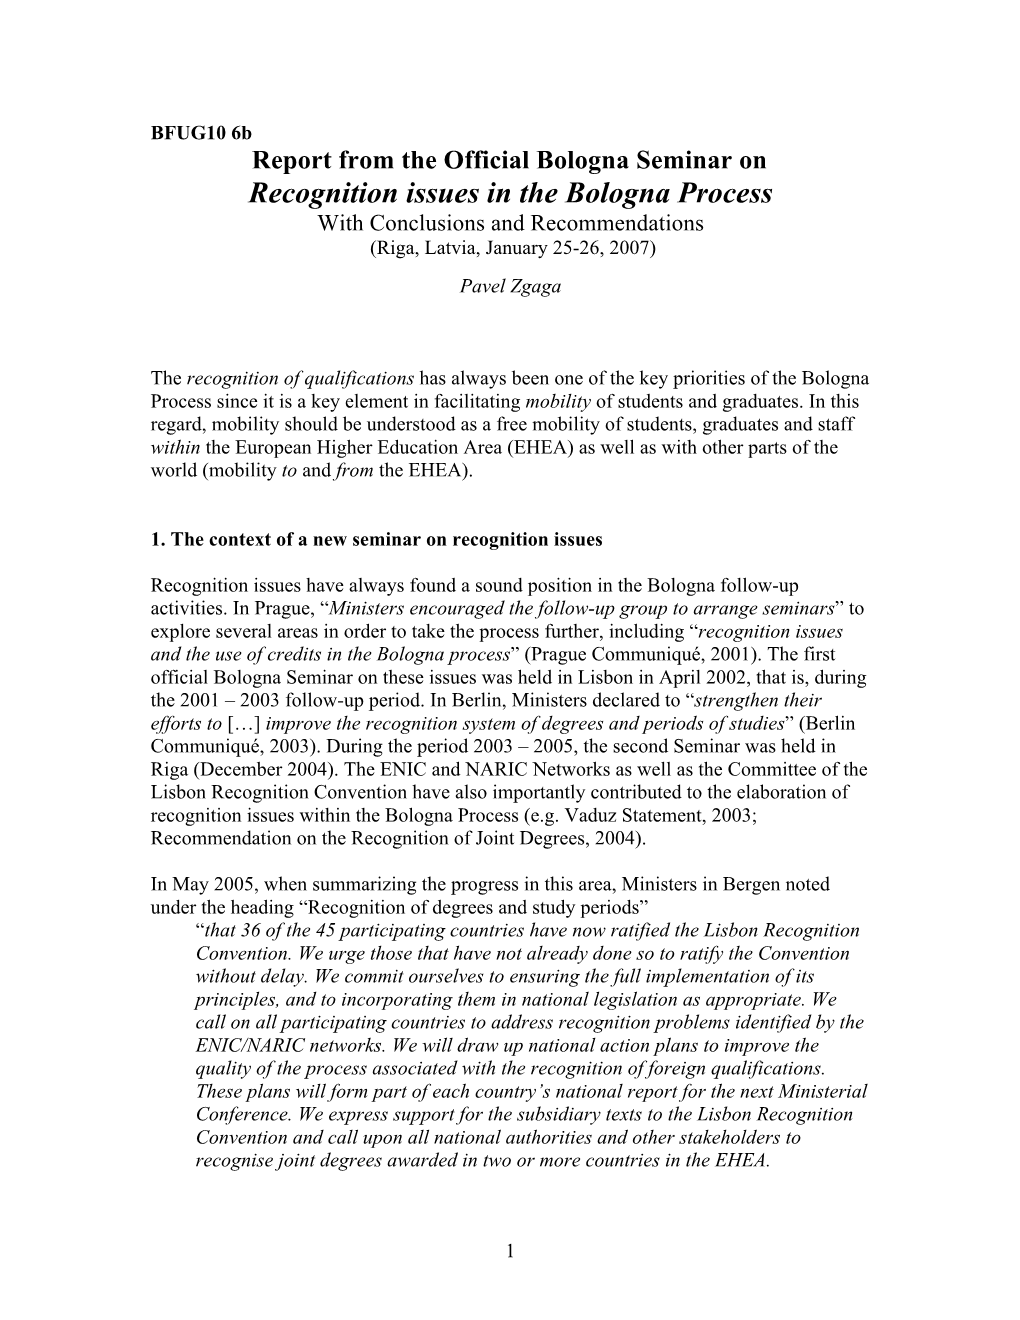 Recognition Issues in the Bologna Process with Conclusions and Recommendations (Riga, Latvia, January 25-26, 2007)